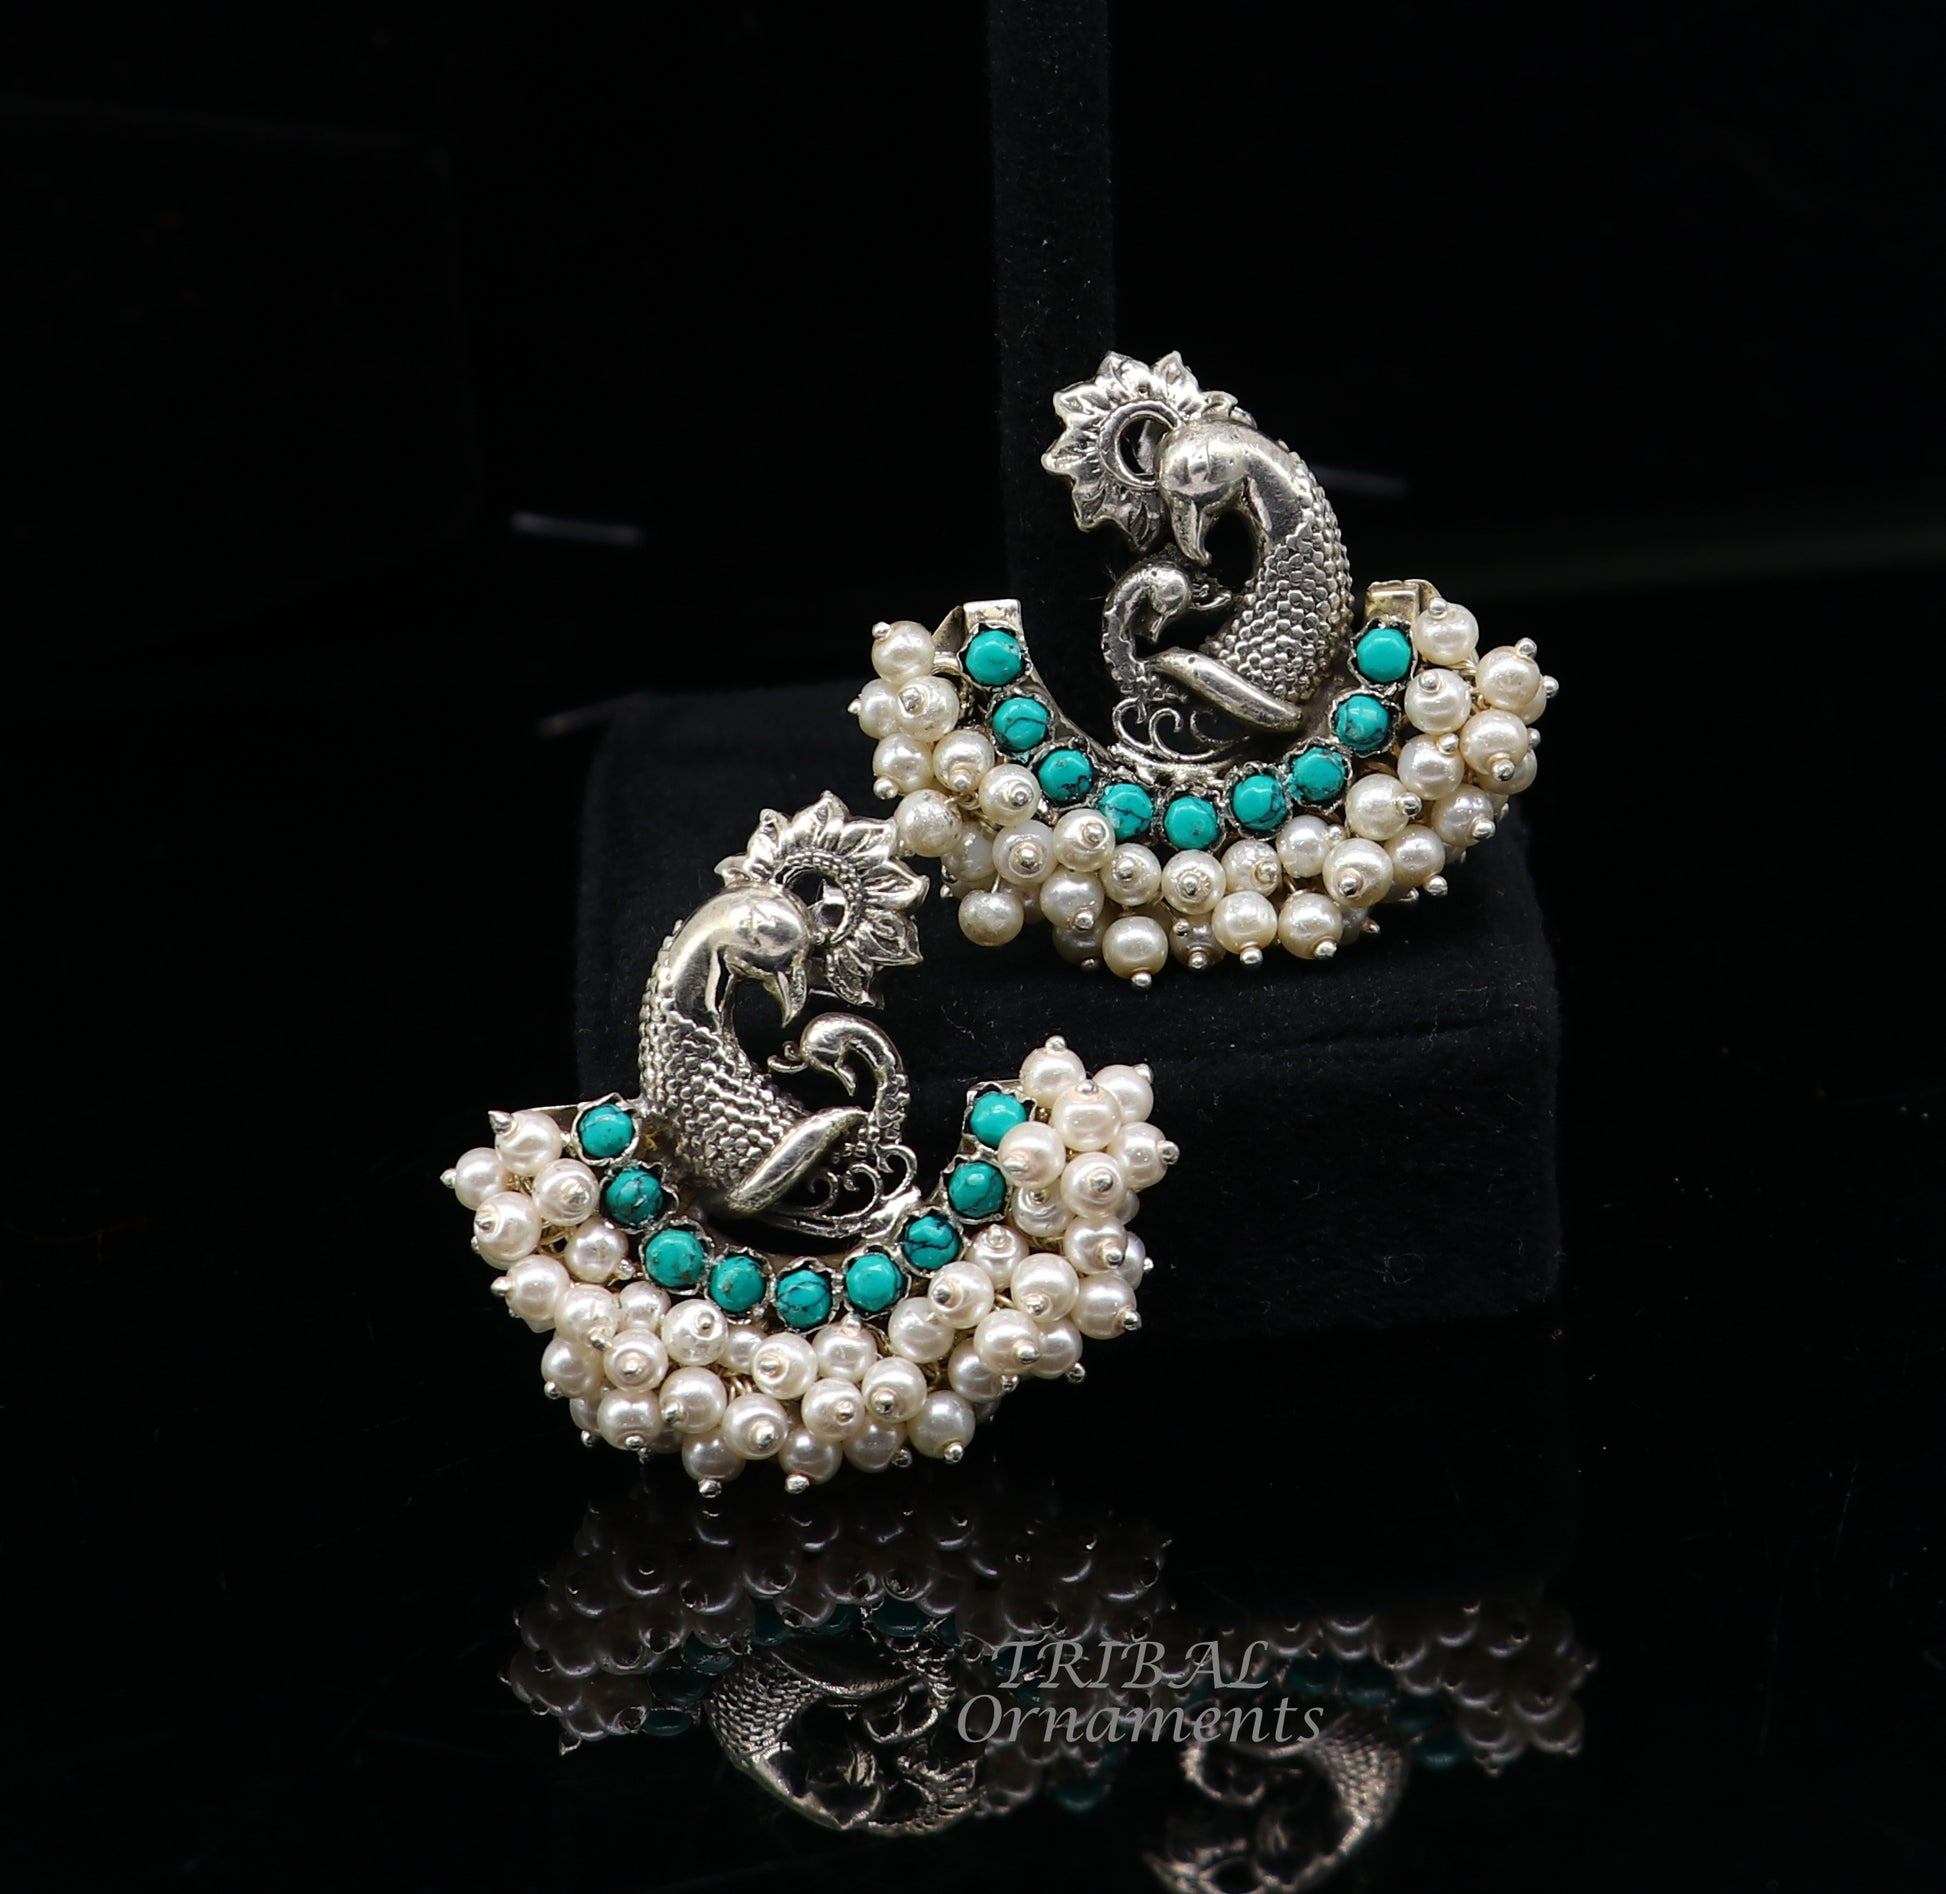 925 sterling silver handmade vintage antique design peacock stud earring fabulous hanging pearl and Green onyx stone earring jewelry s708 - TRIBAL ORNAMENTS